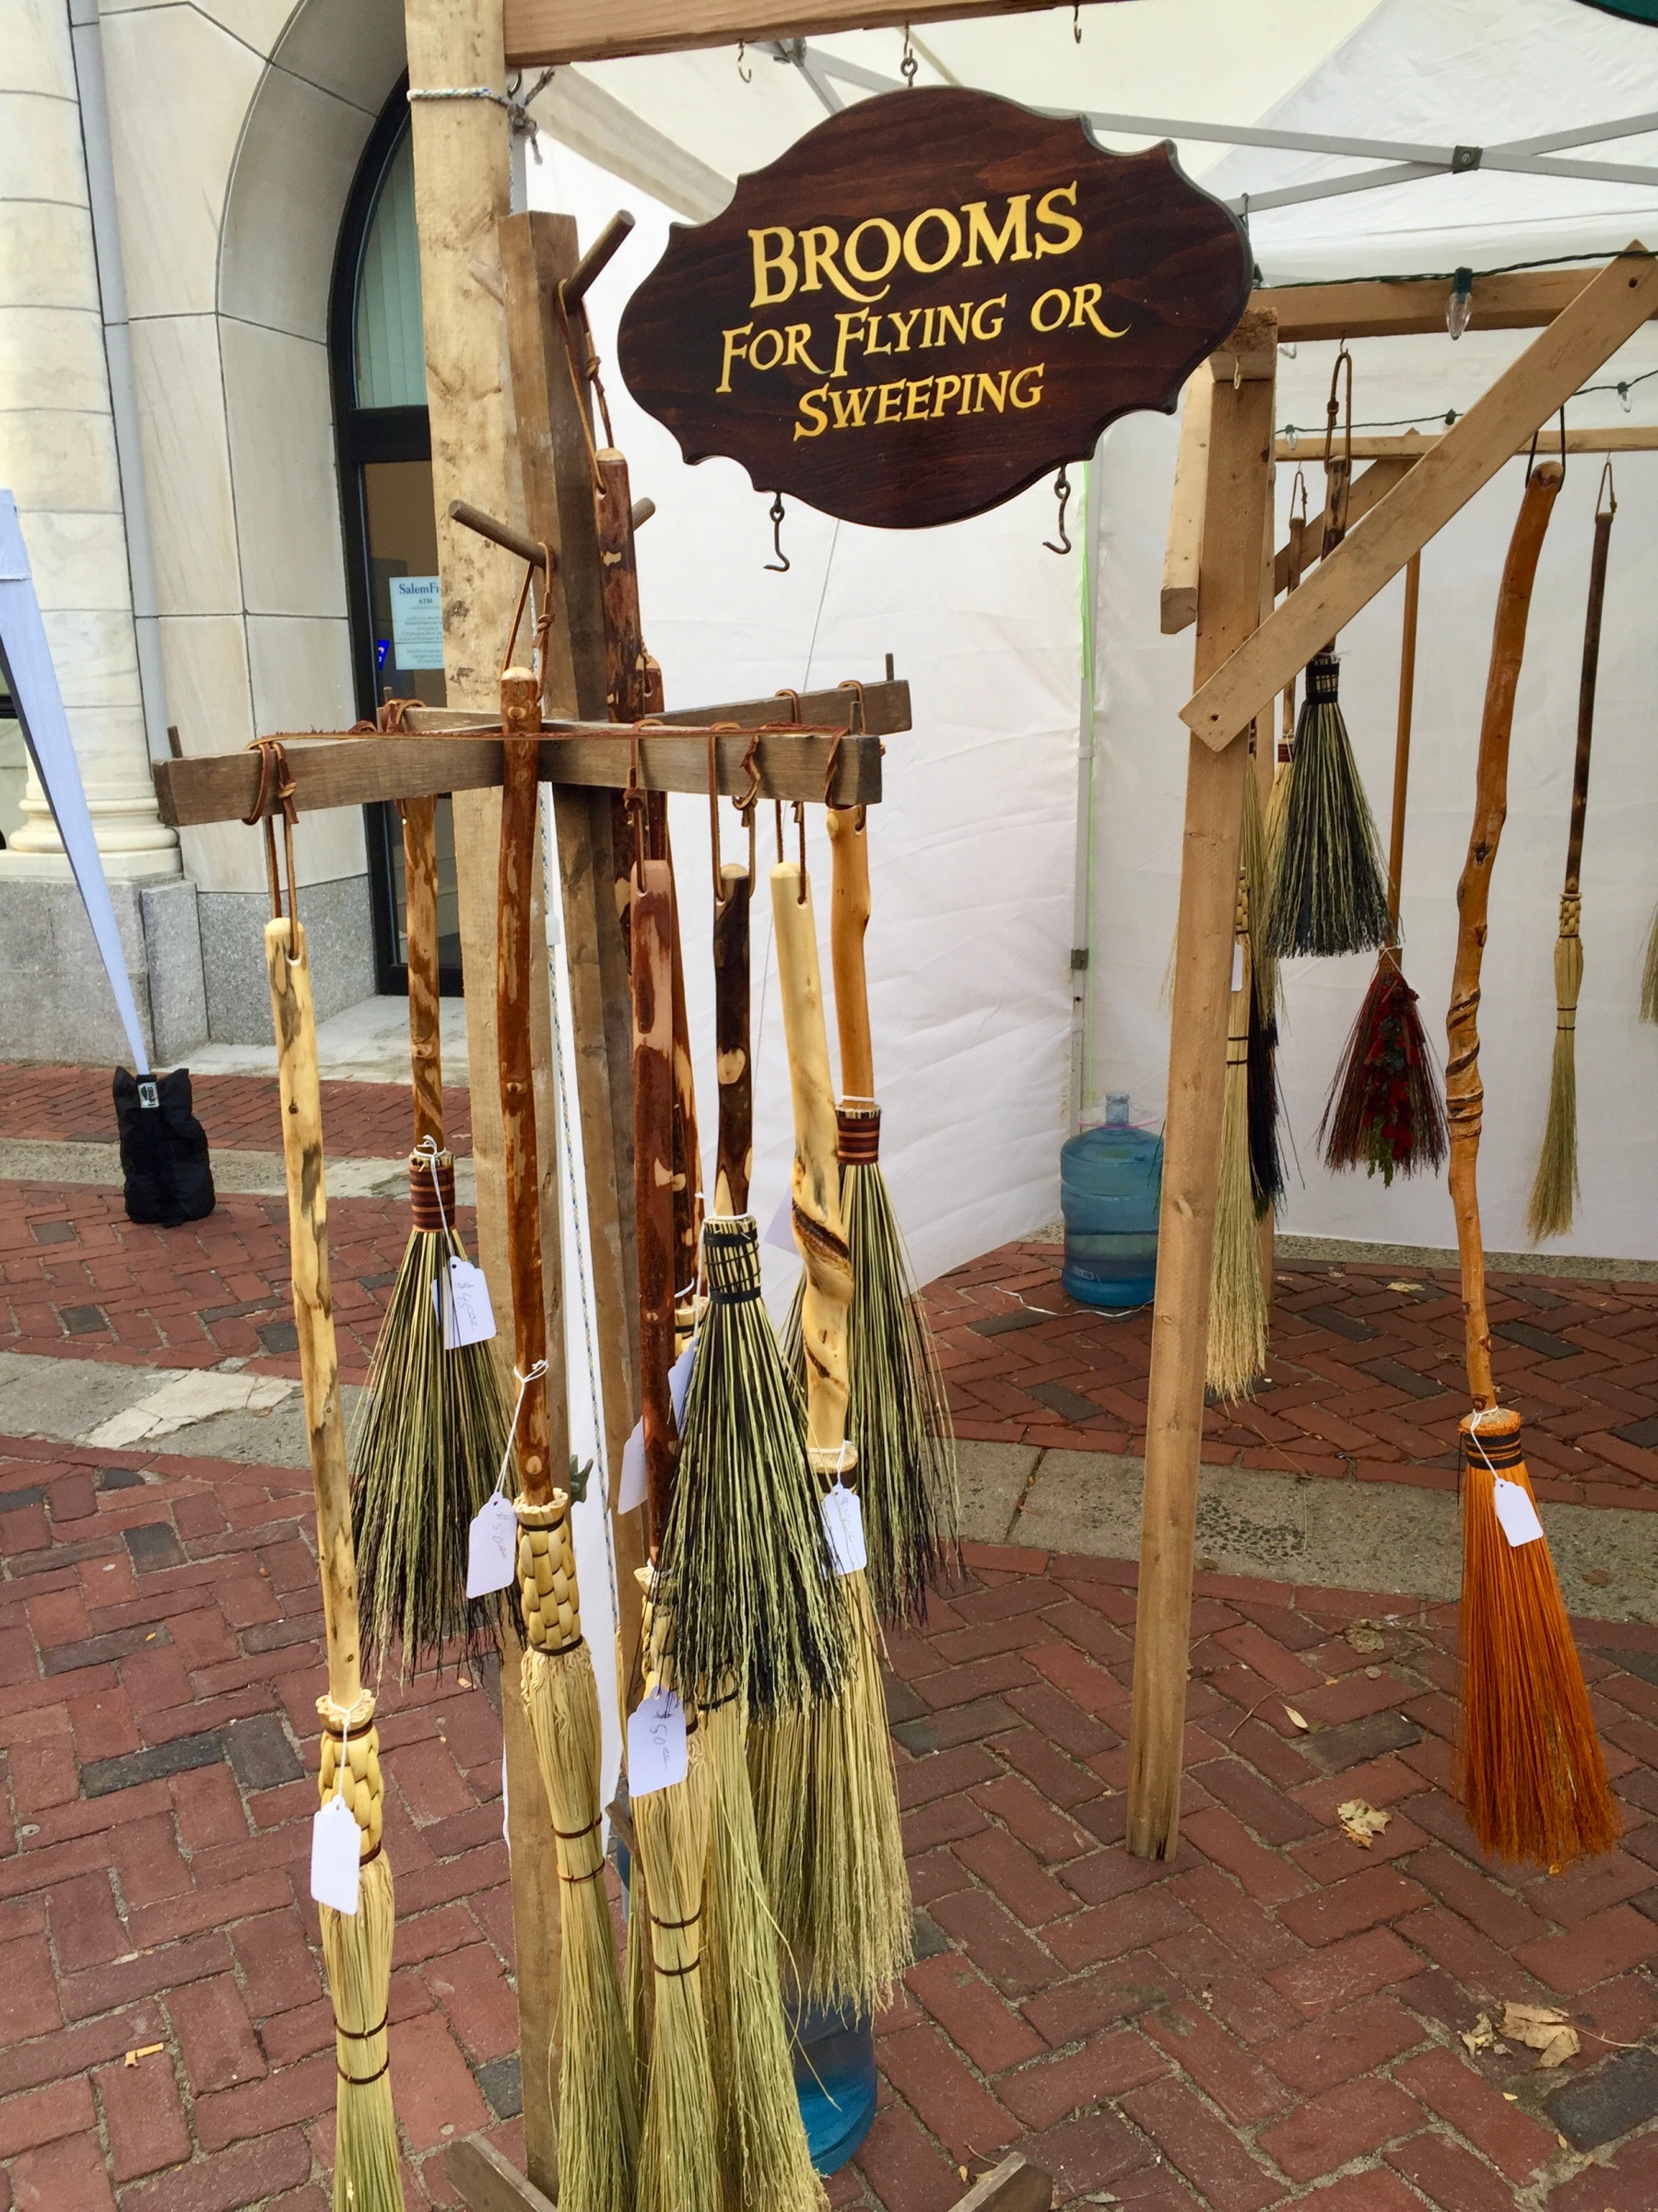 A storefront selling witches brooms in Salem, MA